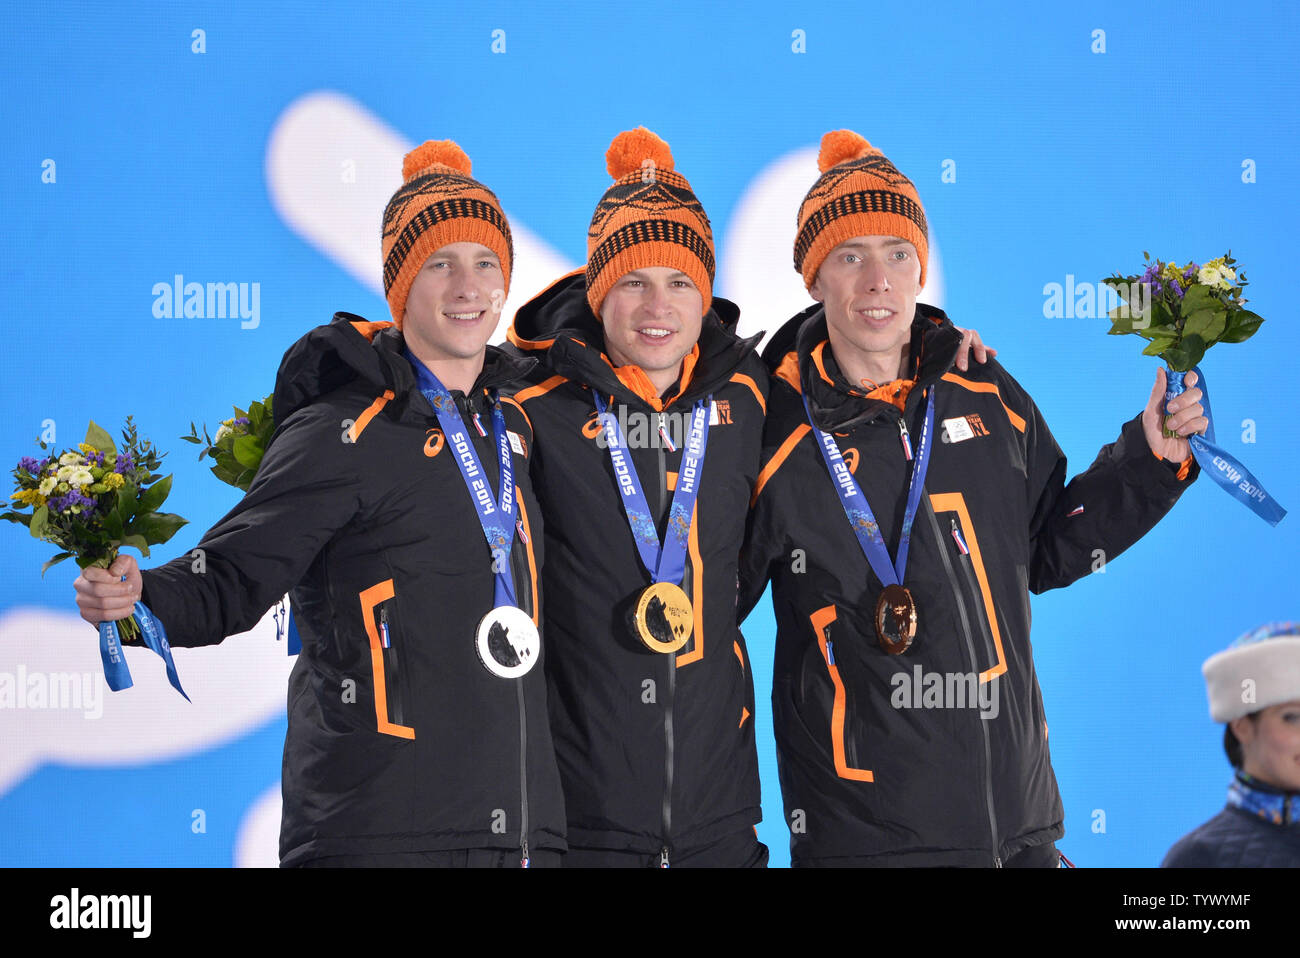 The Netherlands' Jan Blokhuijsen (L-R), Sven Kramer and Jorrit Bergsma hold their silver, gold and bronze medals during a victory ceremony for the Men's 5000m Speed Skating event at the Sochi 2014 Winter Olympics on February 9, 2014 in Sochi, Russia.     UPI/Kevin Dietsch Stock Photo